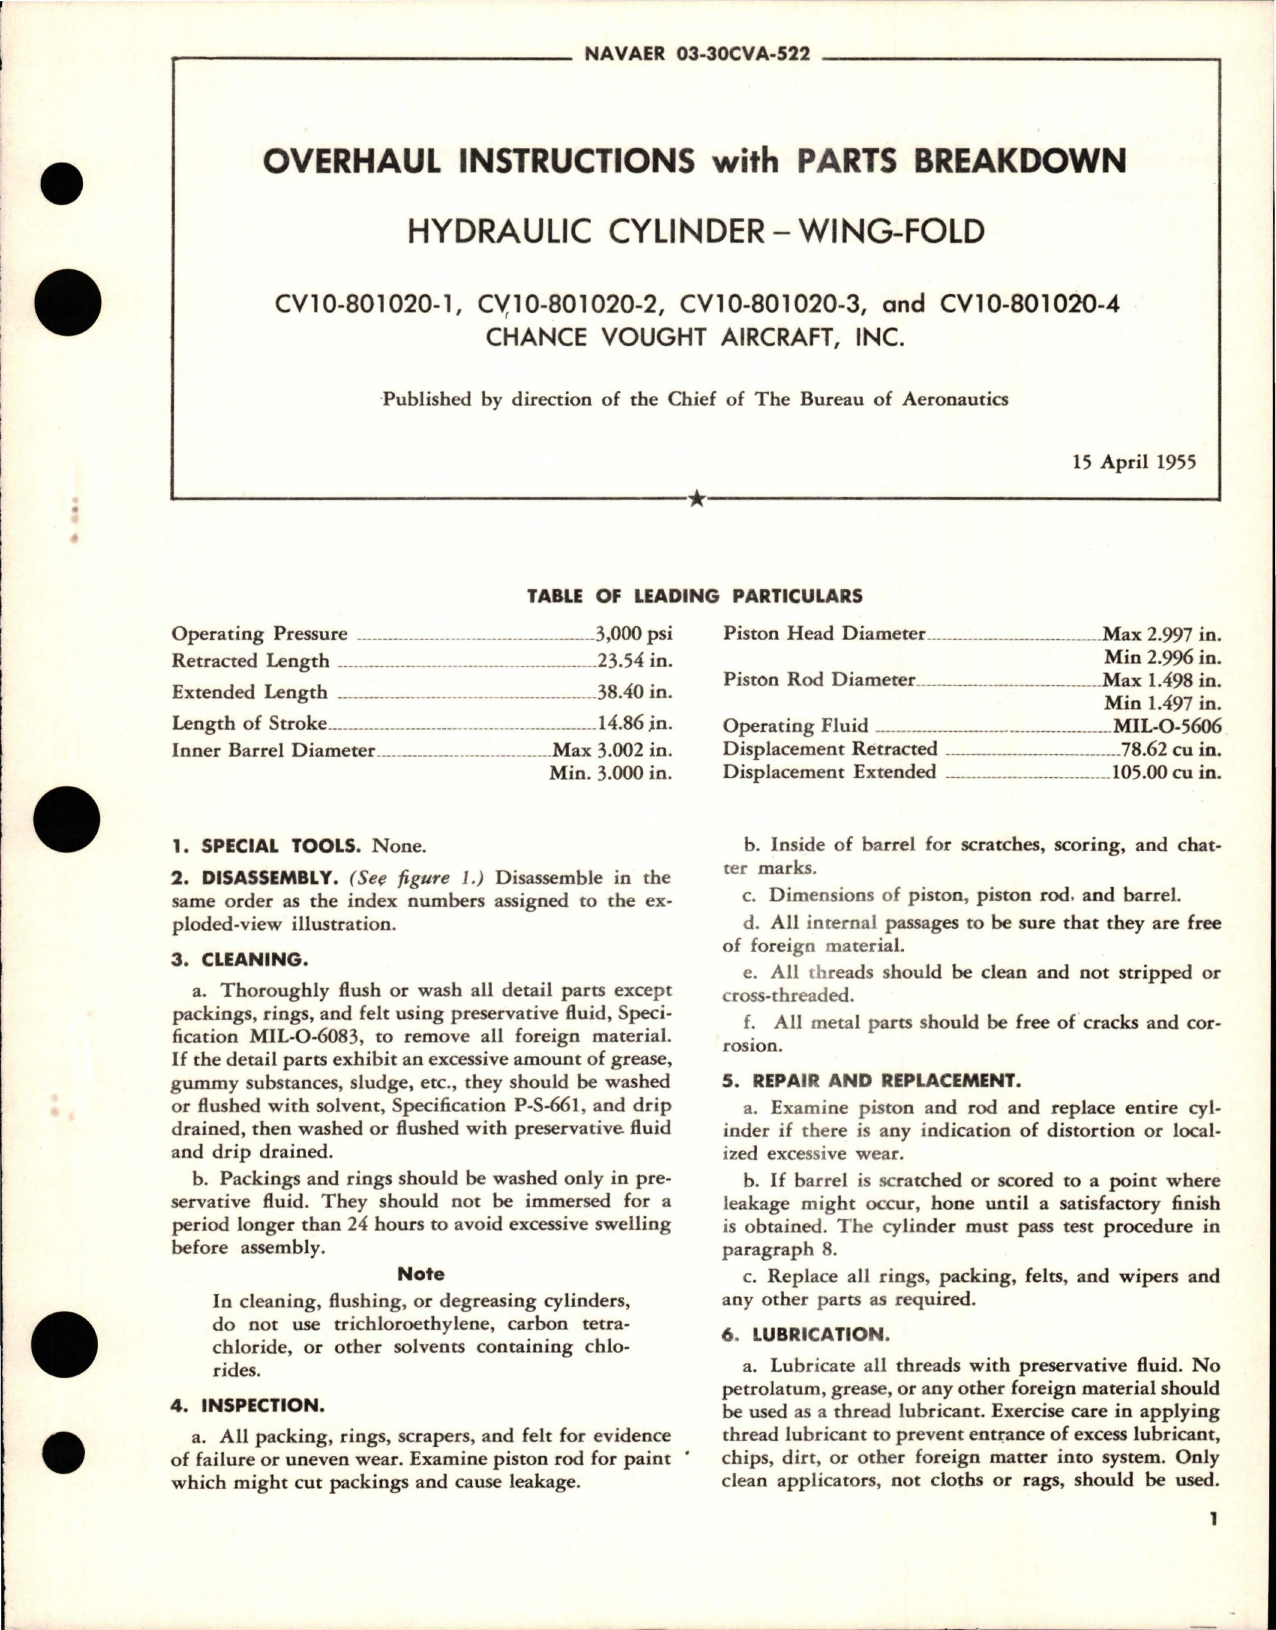 Sample page 1 from AirCorps Library document: Overhaul Instructions with Parts Breakdown for Wing Fold Hydraulic Cylinder